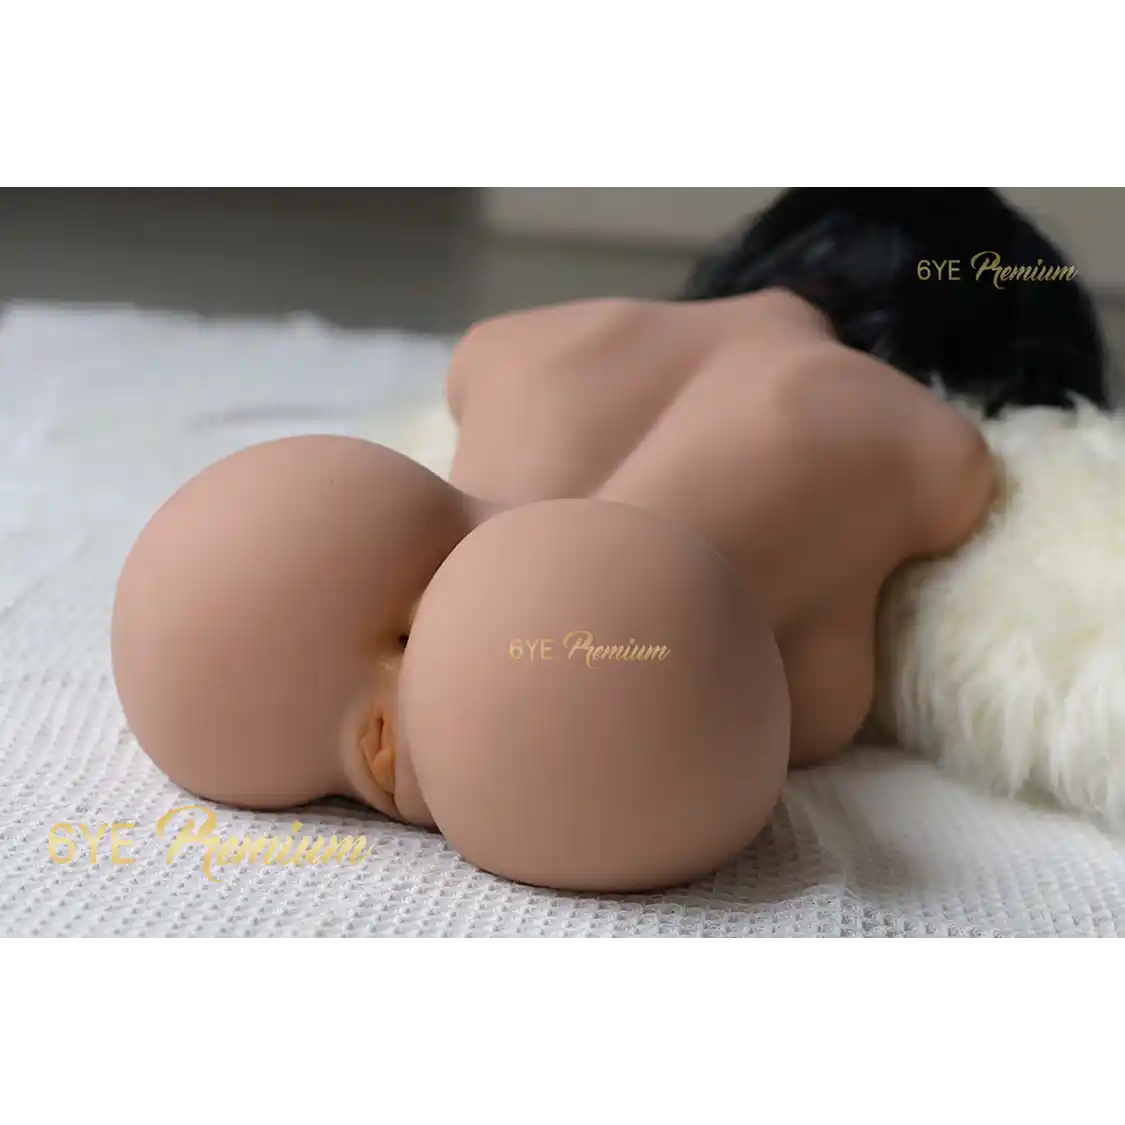 2ft 2in or 66cm E-cup Asian female sex doll torso with pale skin, shoulder length black hair, perky butt, and brown eyes. Made by 6ye